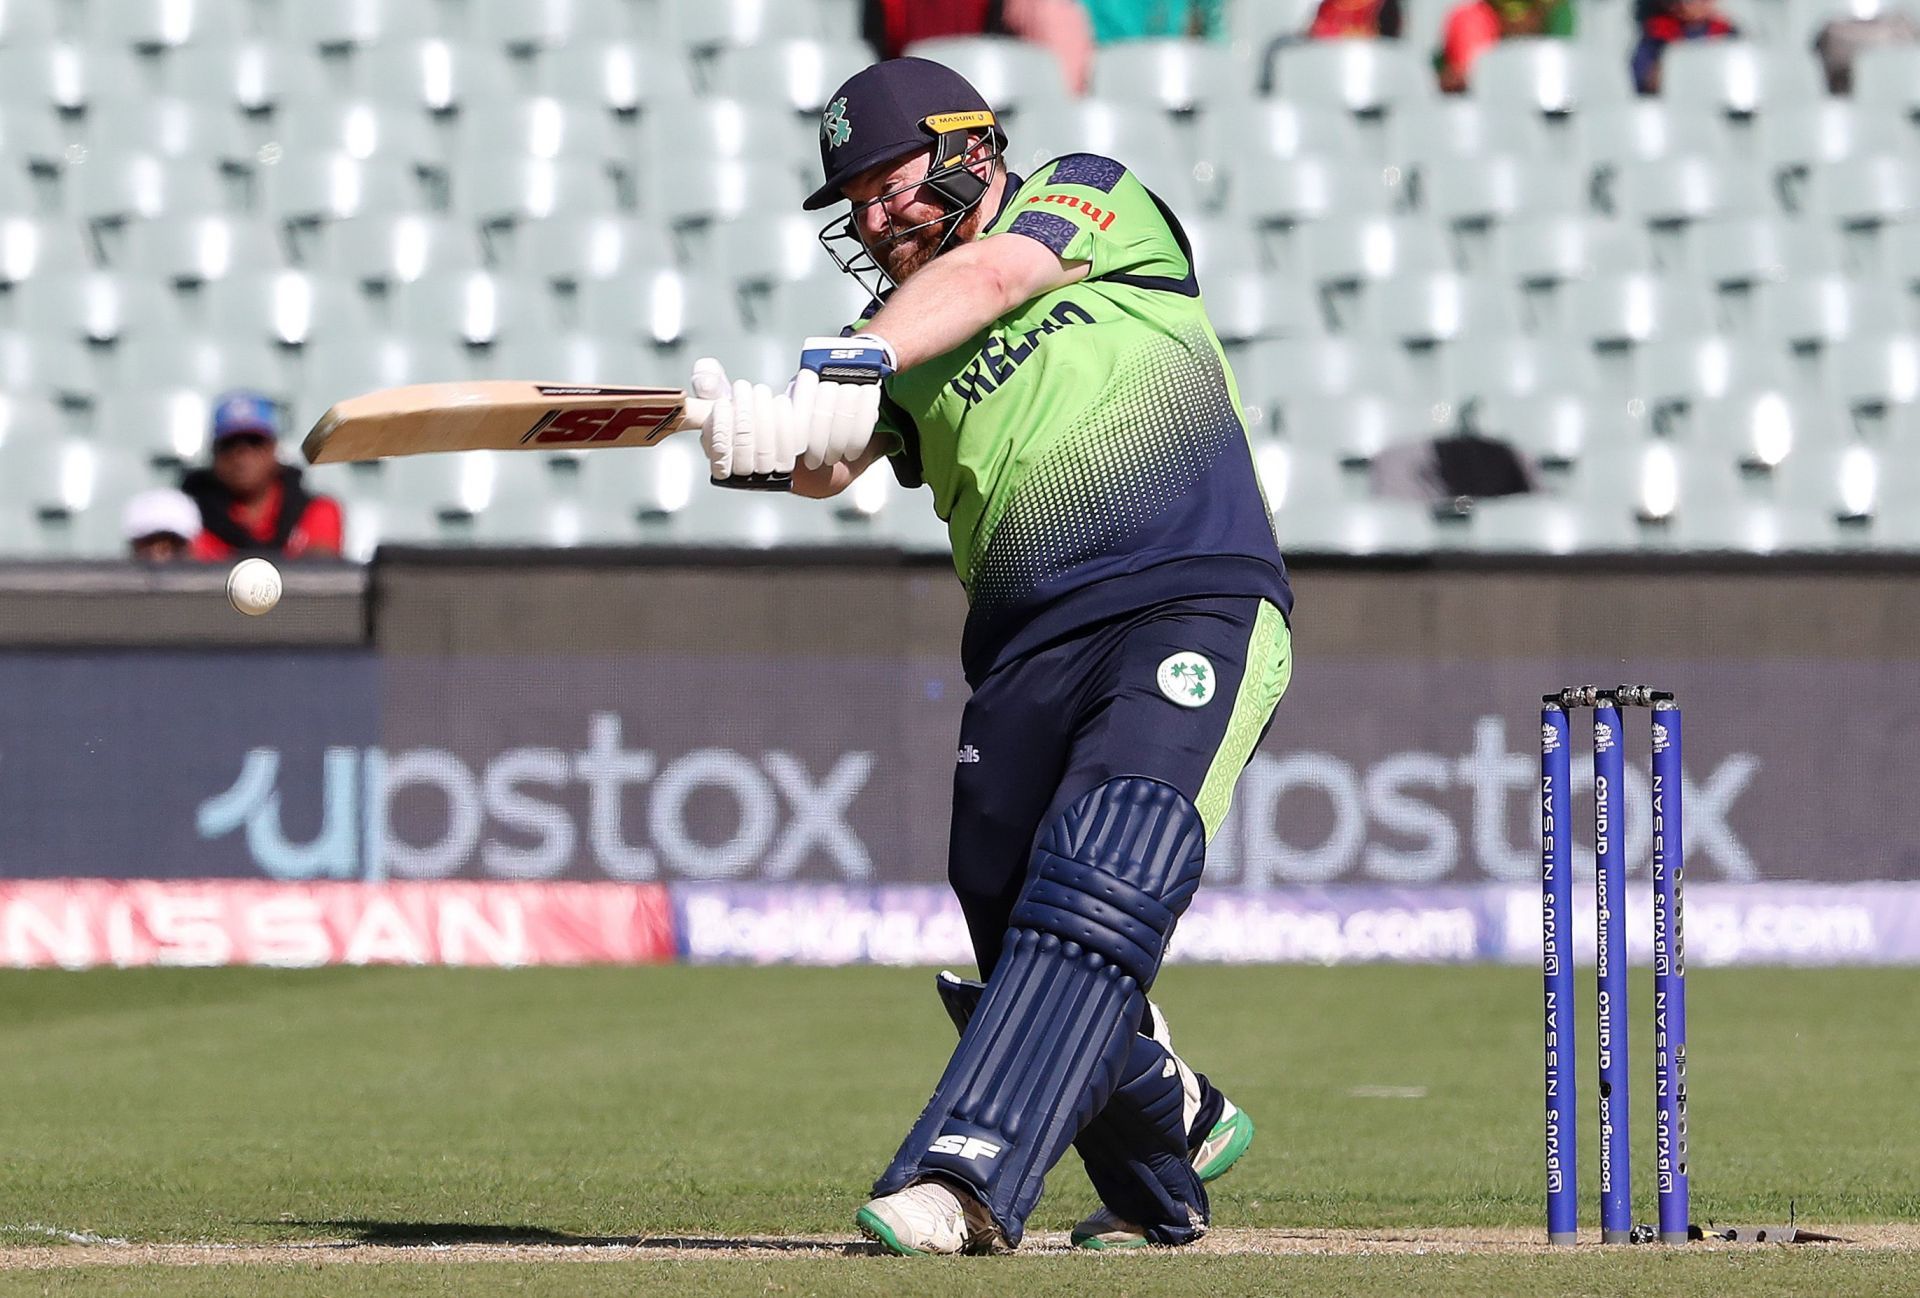 Paul Stirling will be leading the Irish side (Image Credit: Getty Images)